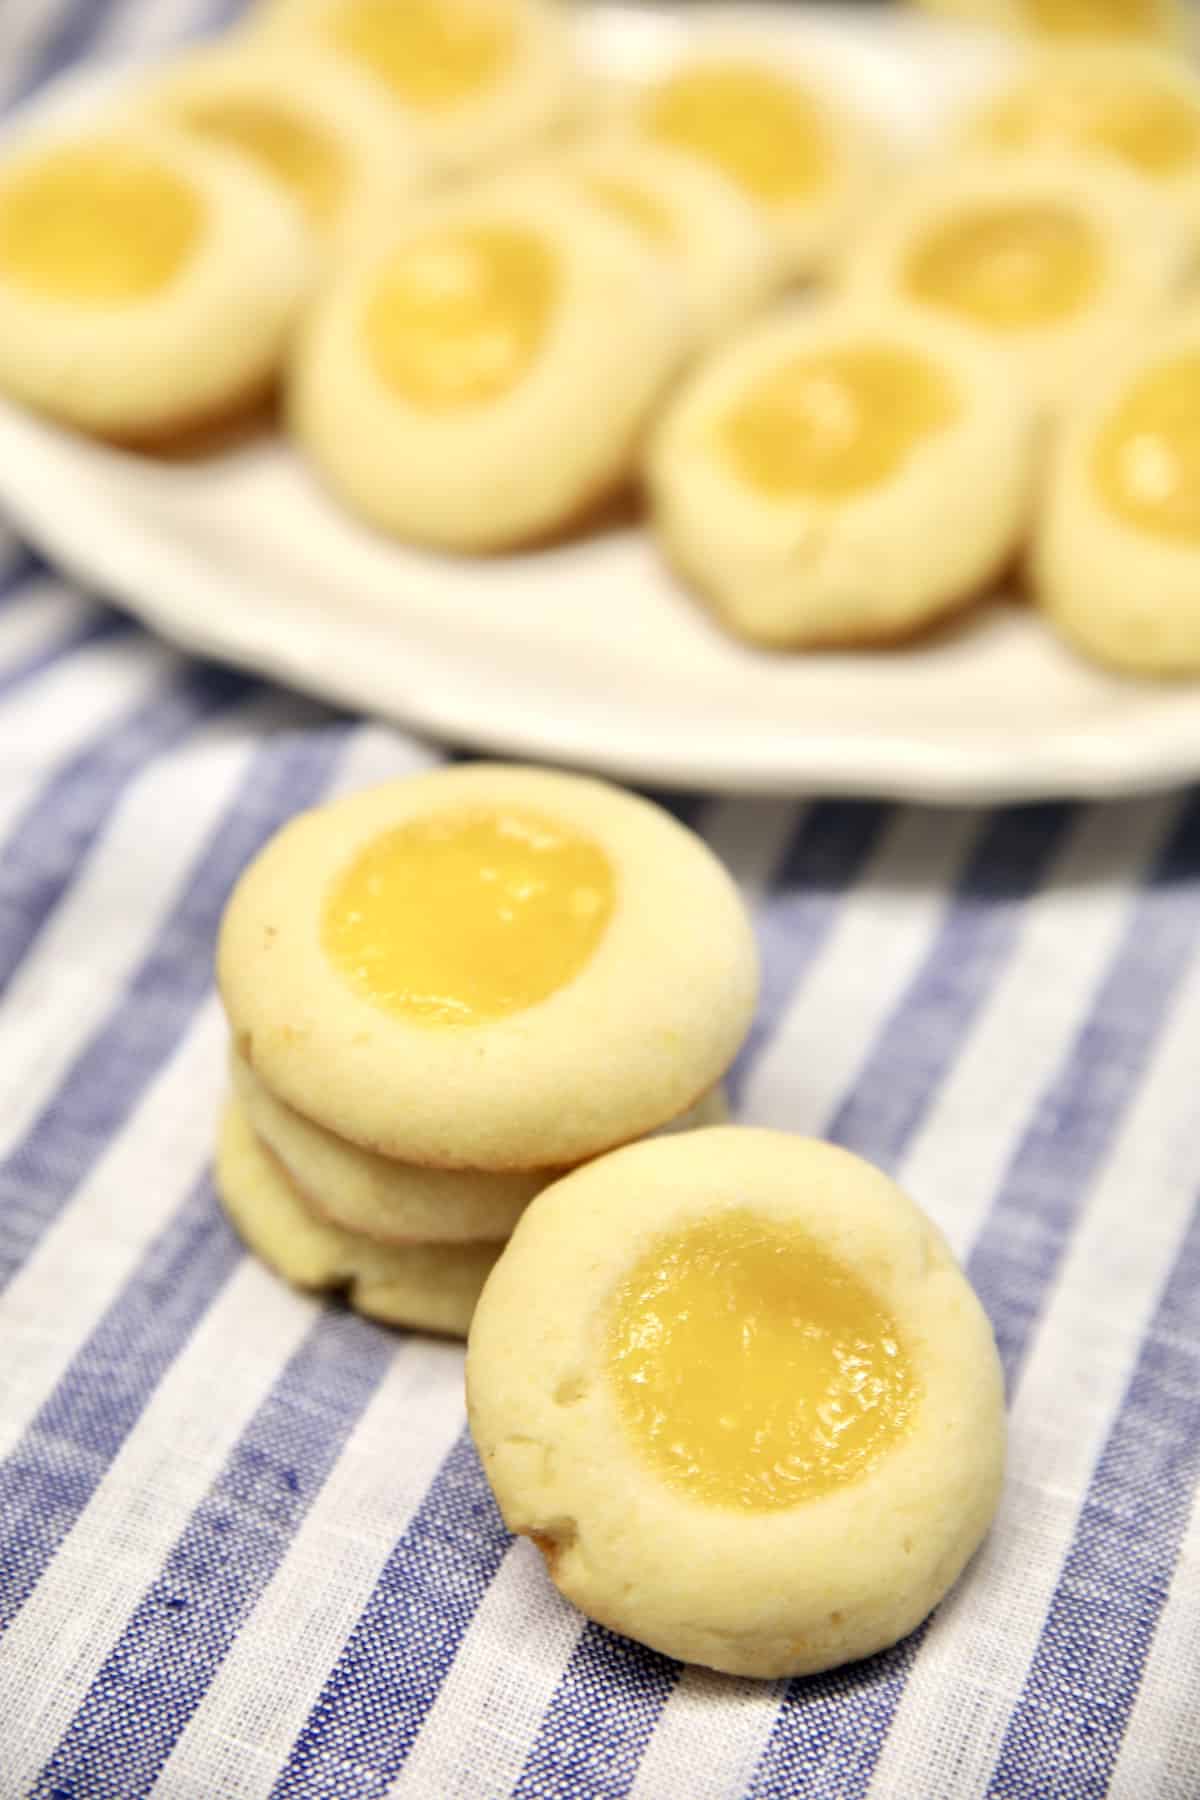 Lemon curd cookies, stacked on a blue and white striped cloth. Platter in background.